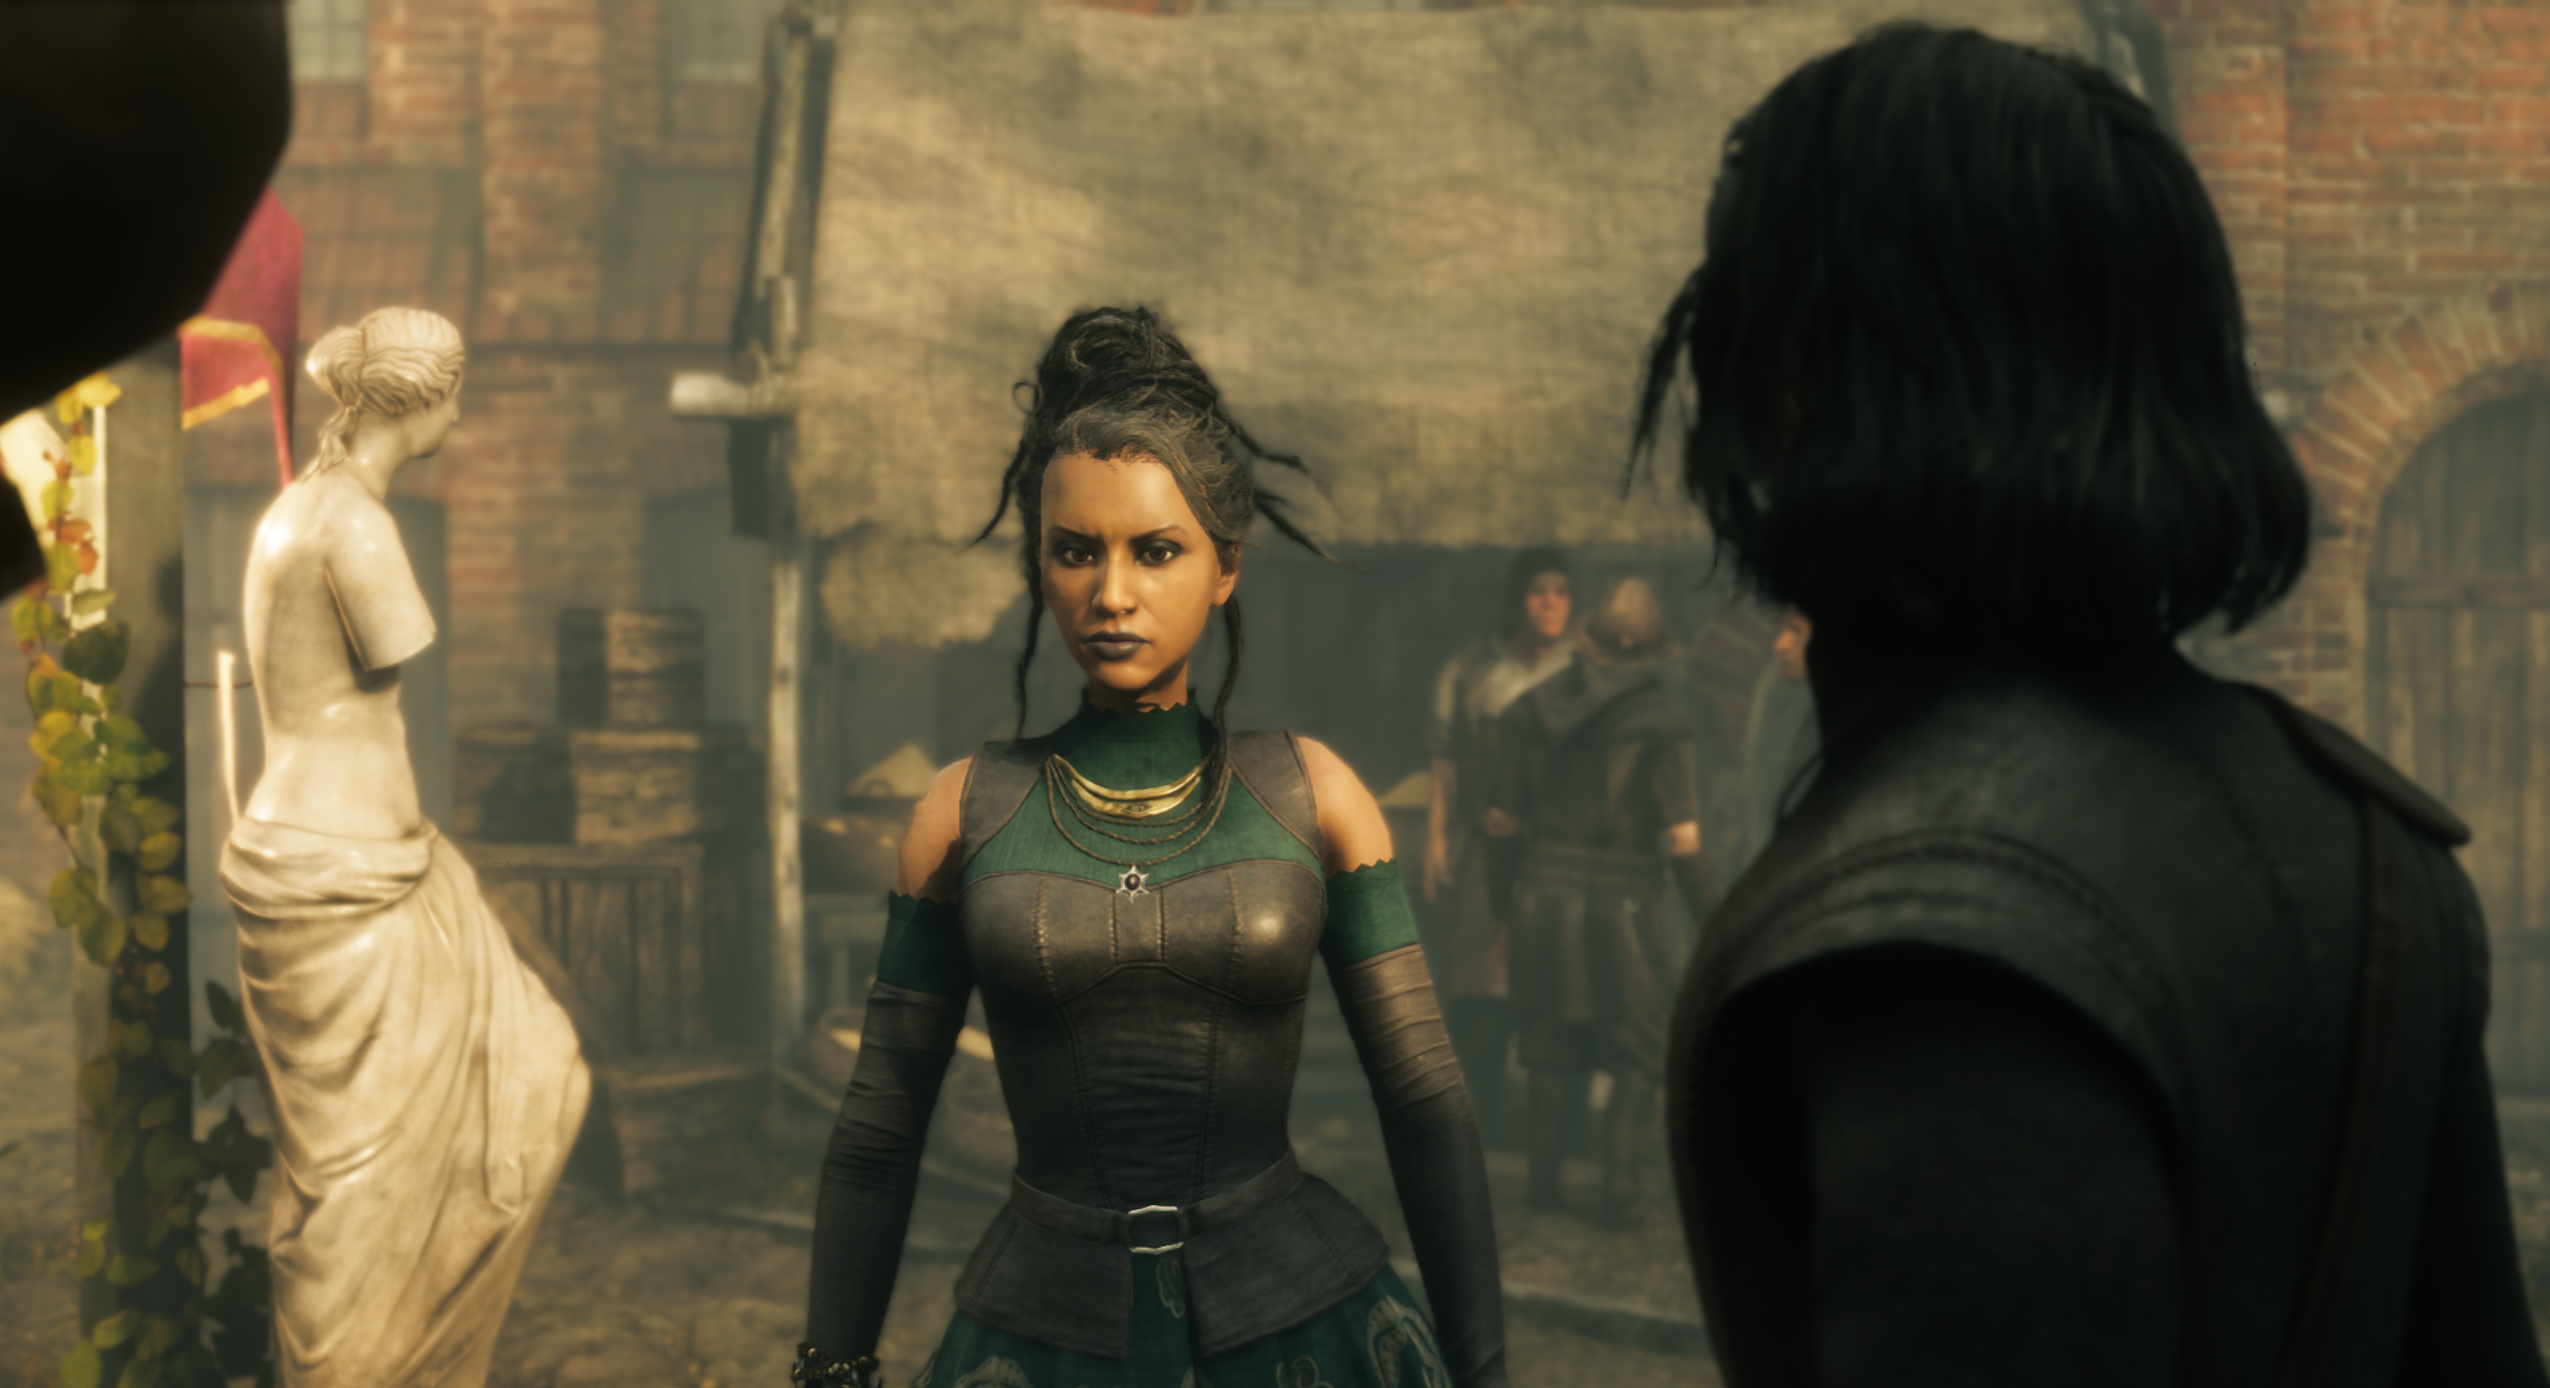 The Inquisitor review image showing a woman with dreadlocks.